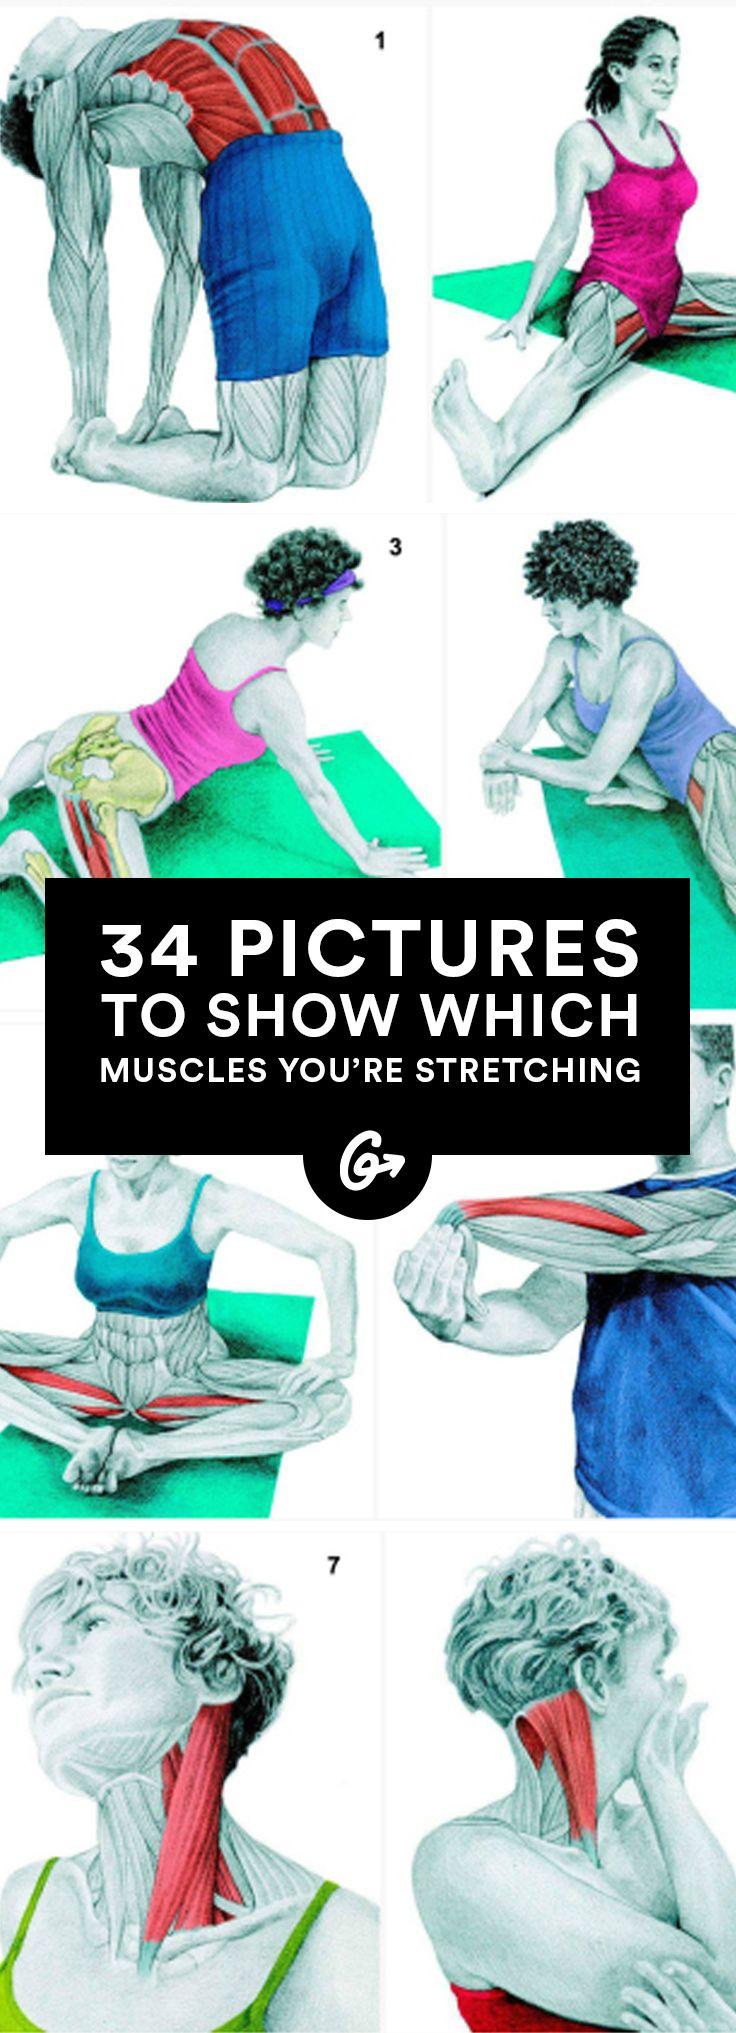 Wedding - These Mesmerizing Illustrations Will Help You Get The Best Stretch